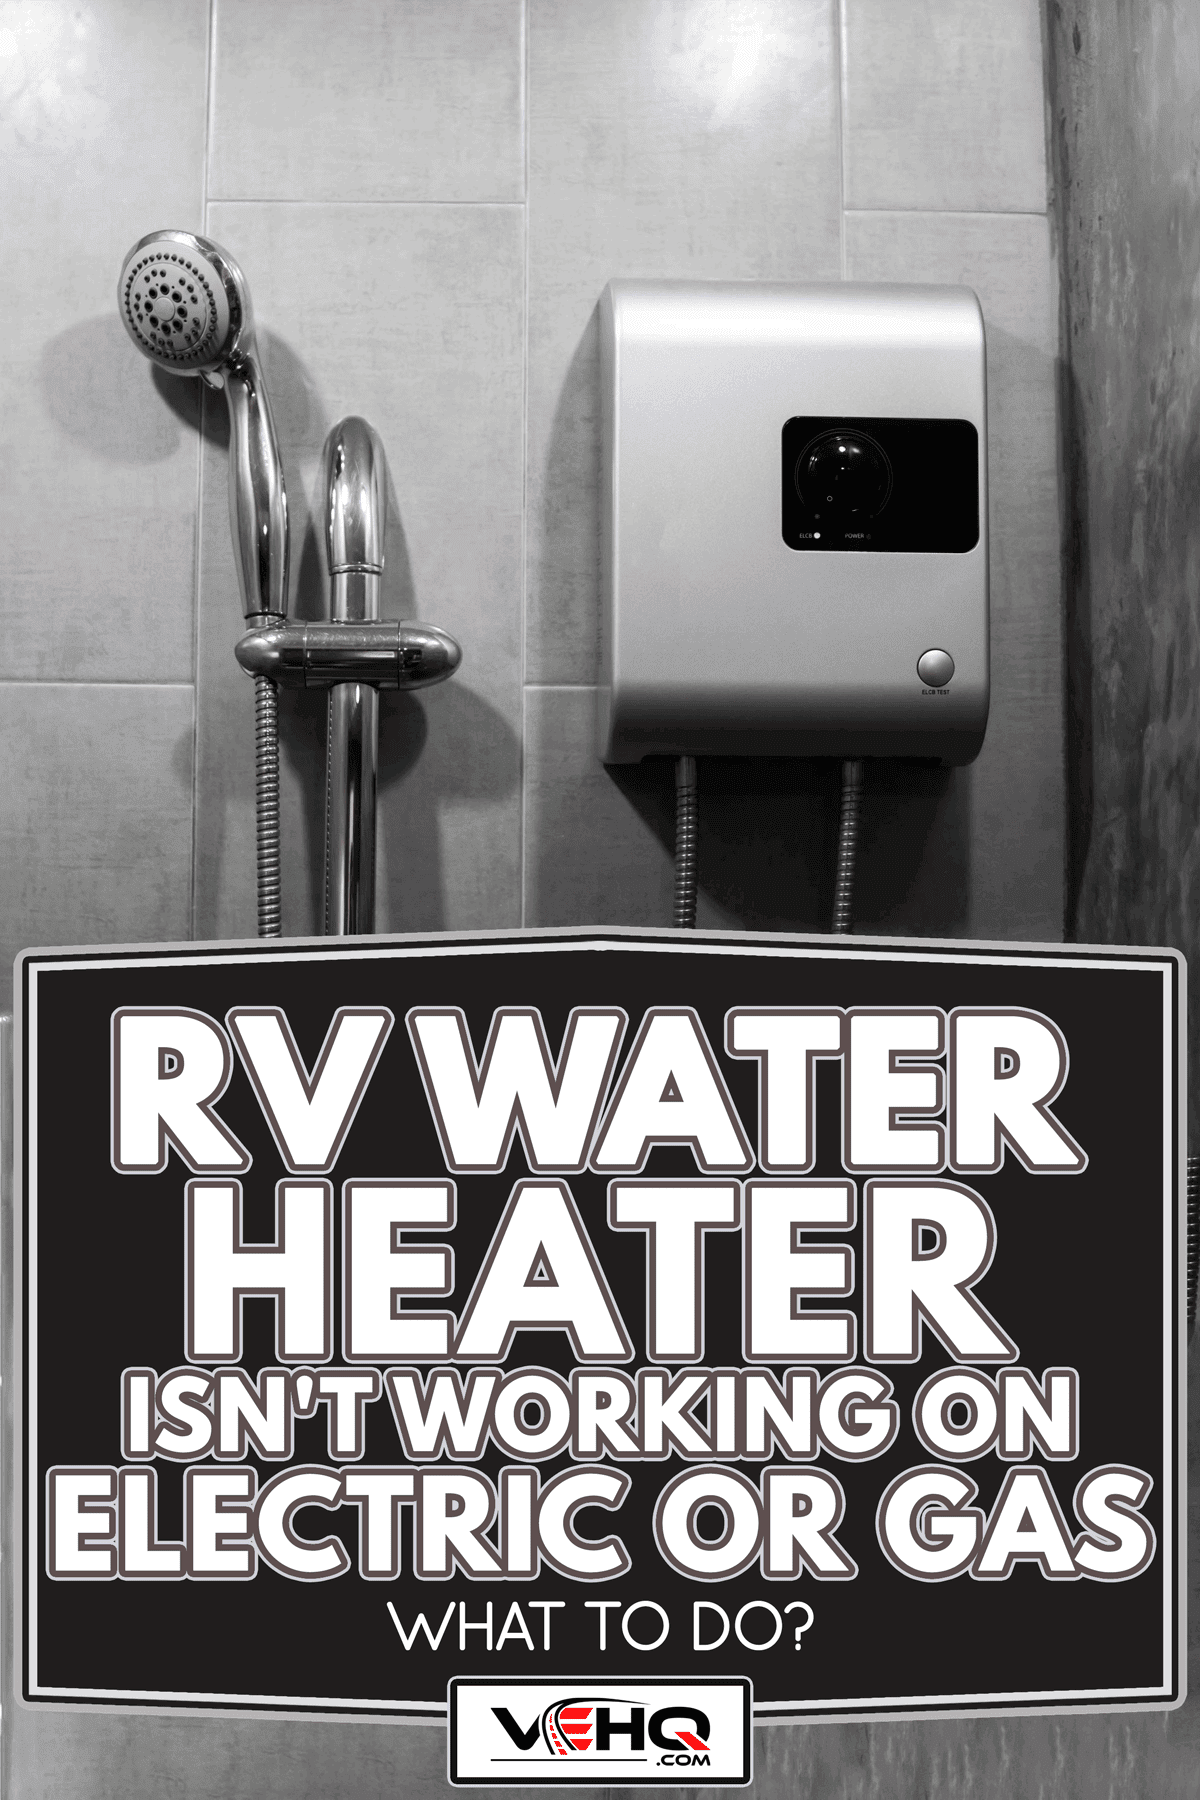 Instant tankless electric water heater, RV Water Heater Isn't Working On Electric Or Gas - What To Do?